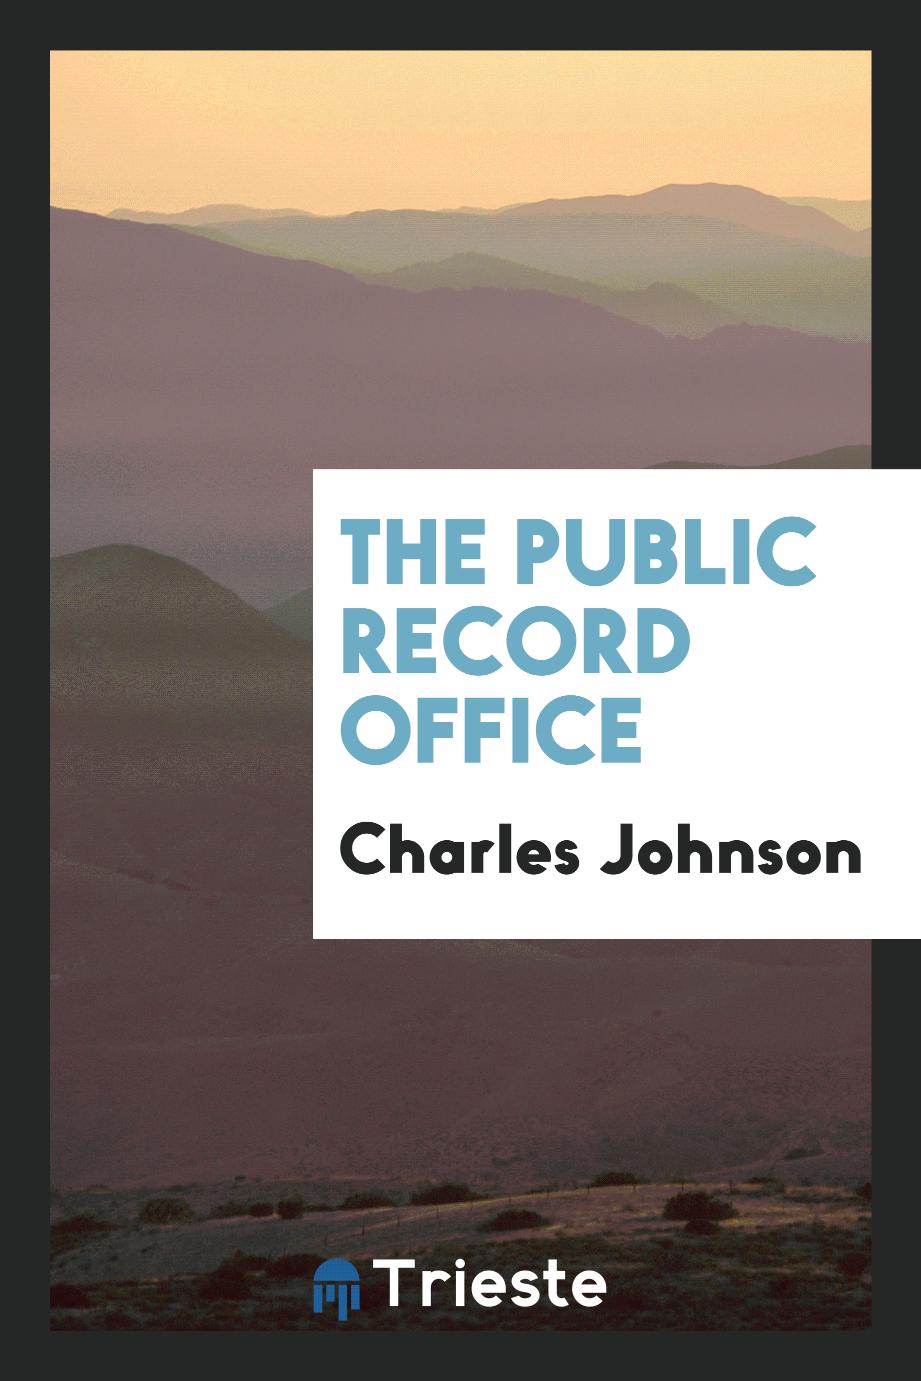 The Public Record Office